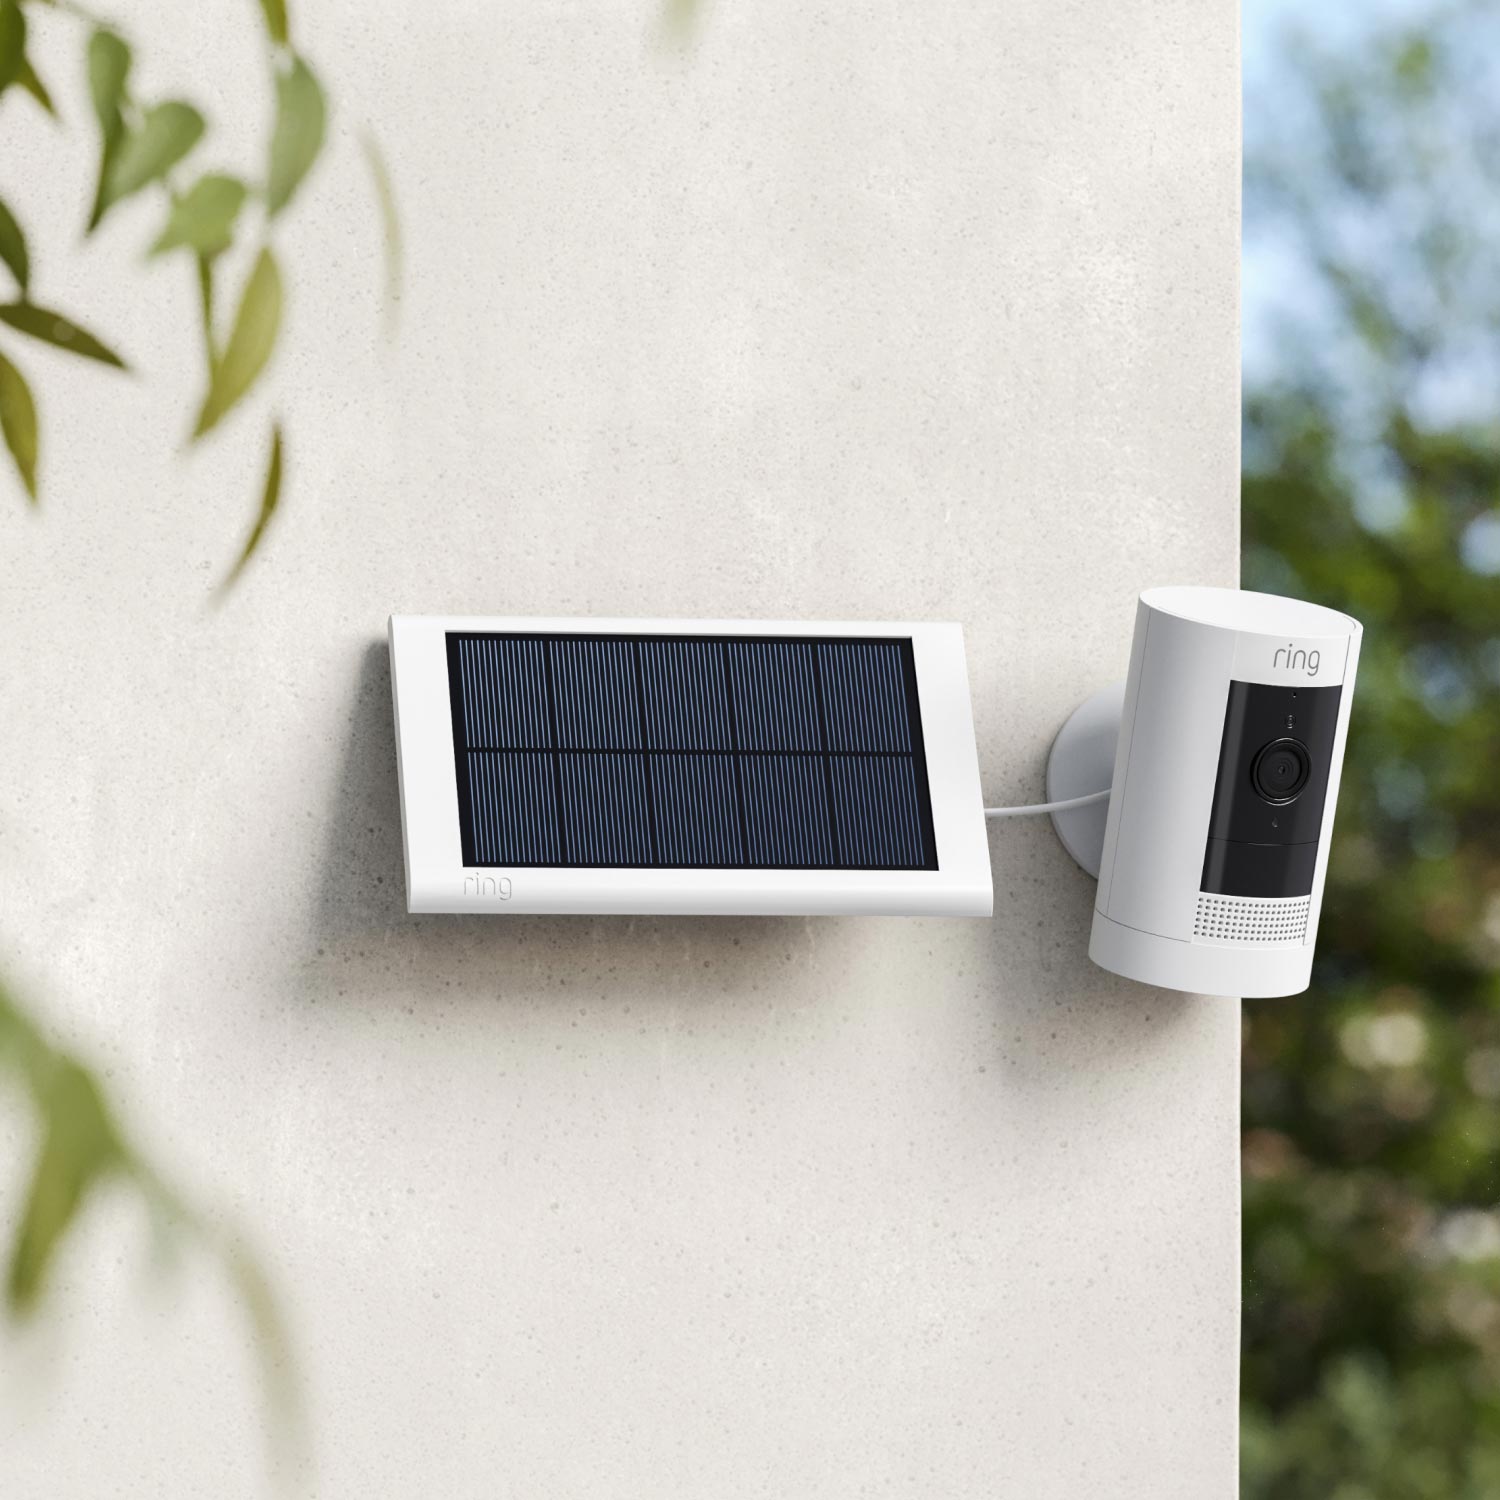 4-Pack Stick Up Cam Solar - Stick Up Cam and small solar panel, both in white, mounted to outside corner of house.